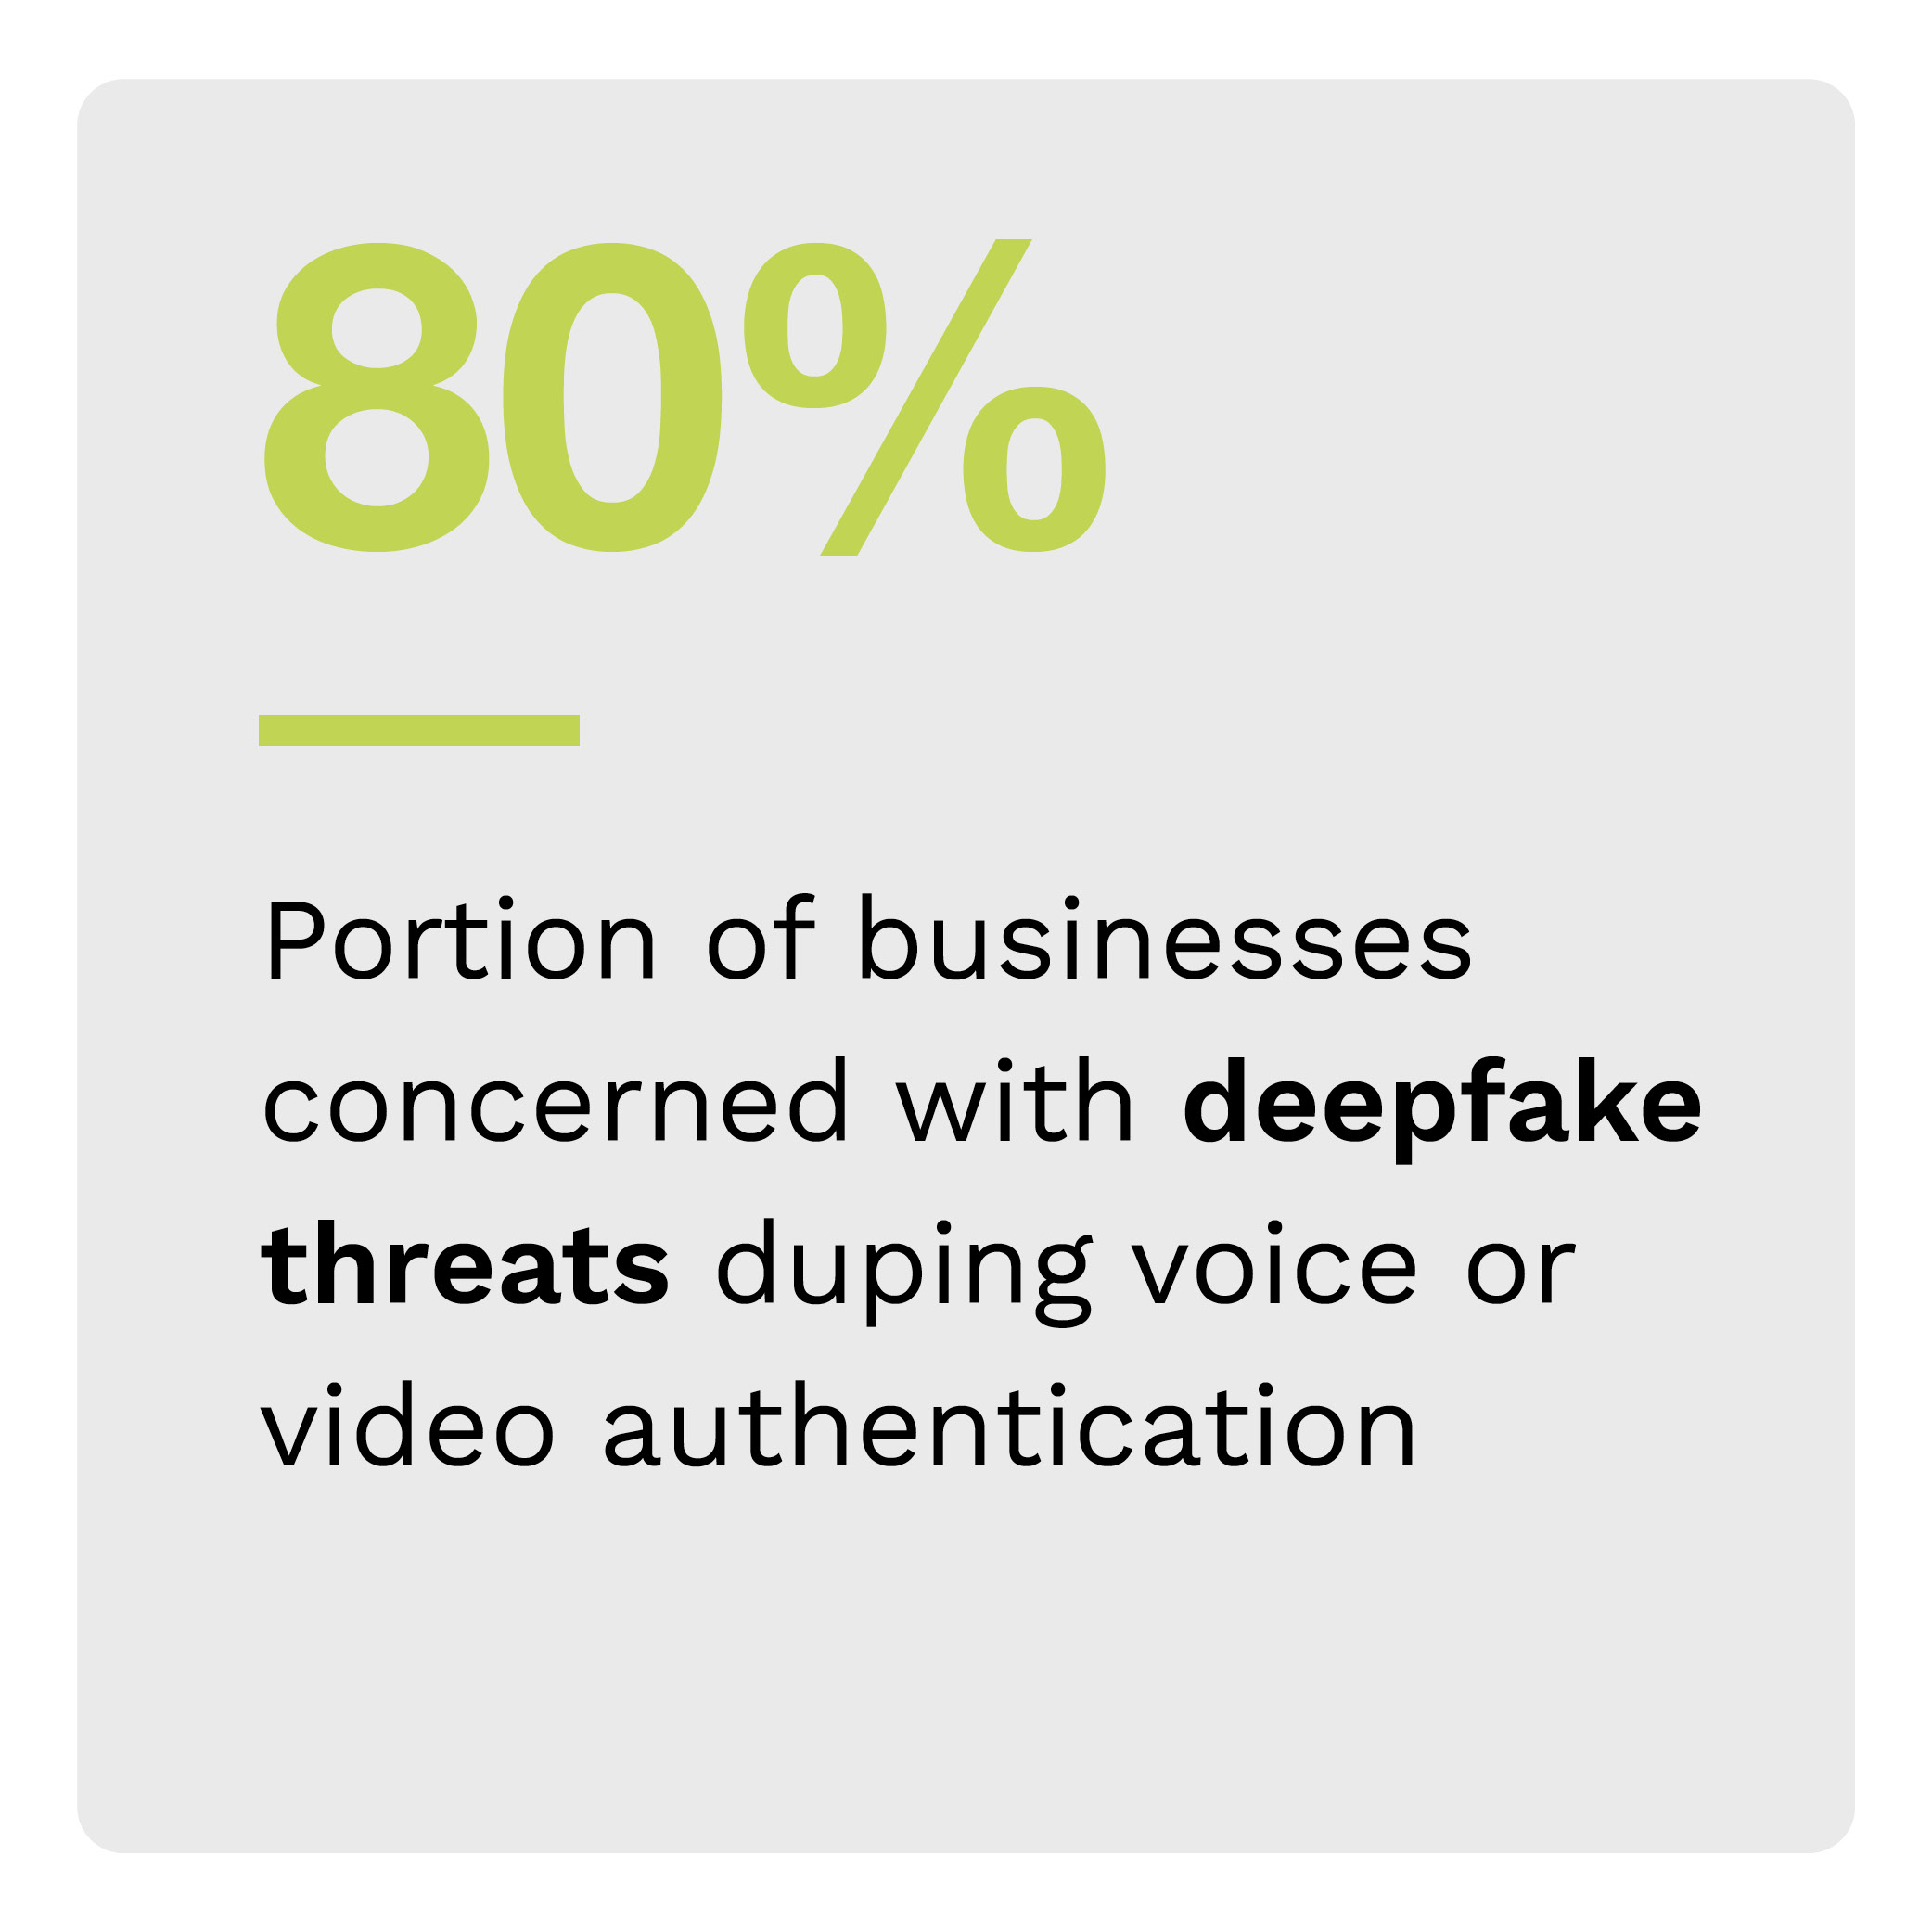 80%: Portion of businesses concerned with deepfake threats duping voice or video authentication